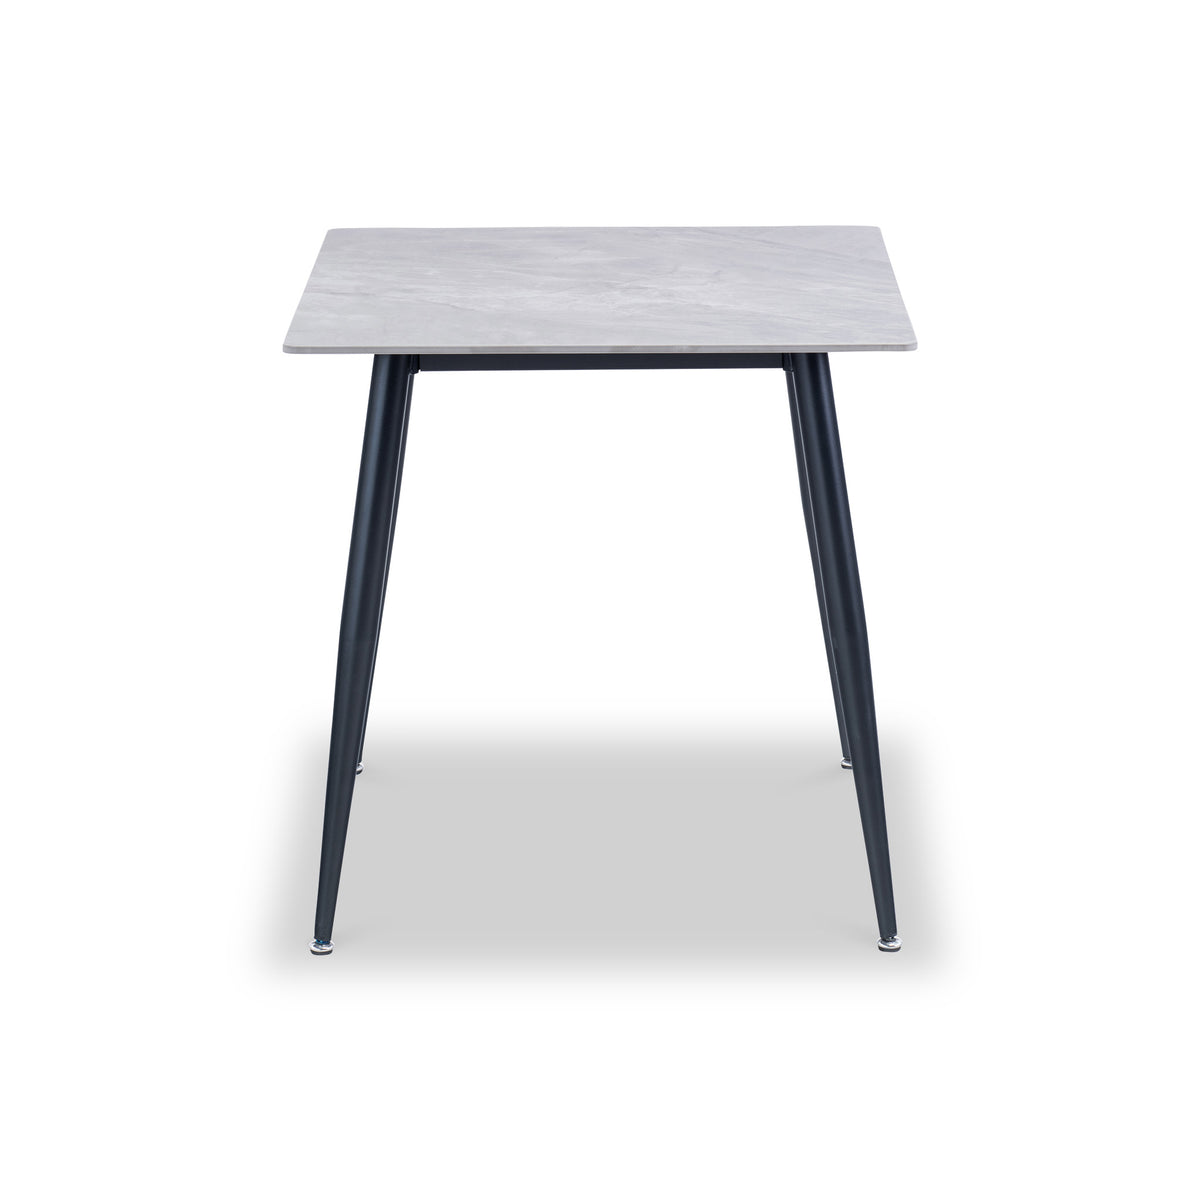 Avril Grey 75cm Sintered Stone Square Dining Table from Roseland Furniture